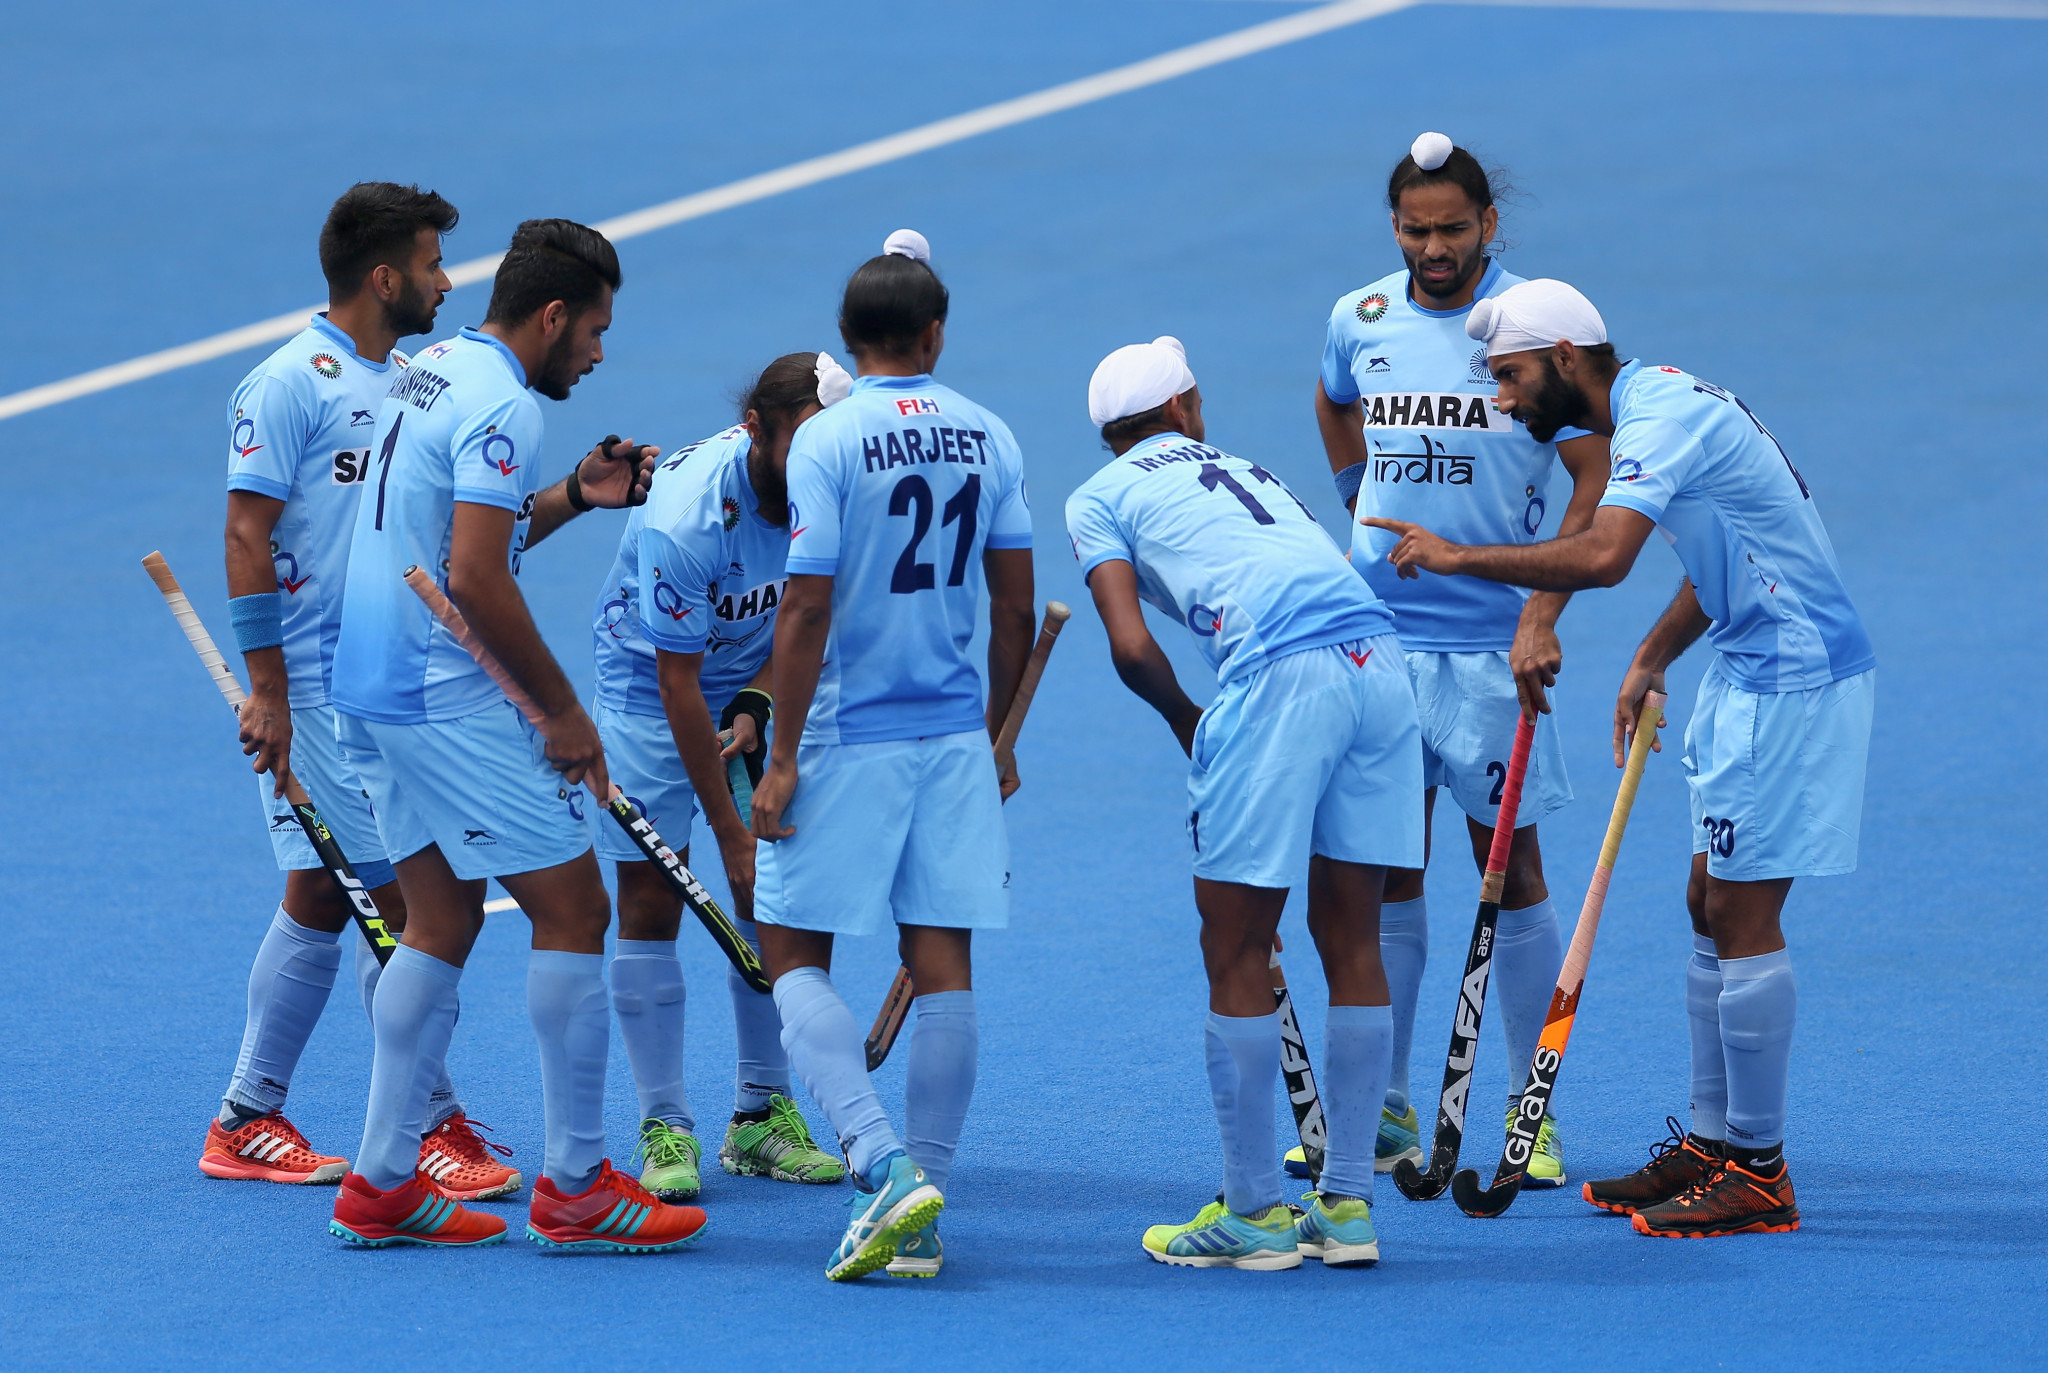 India withdrew from the new Hockey Pro League earlier this year ©Getty Images